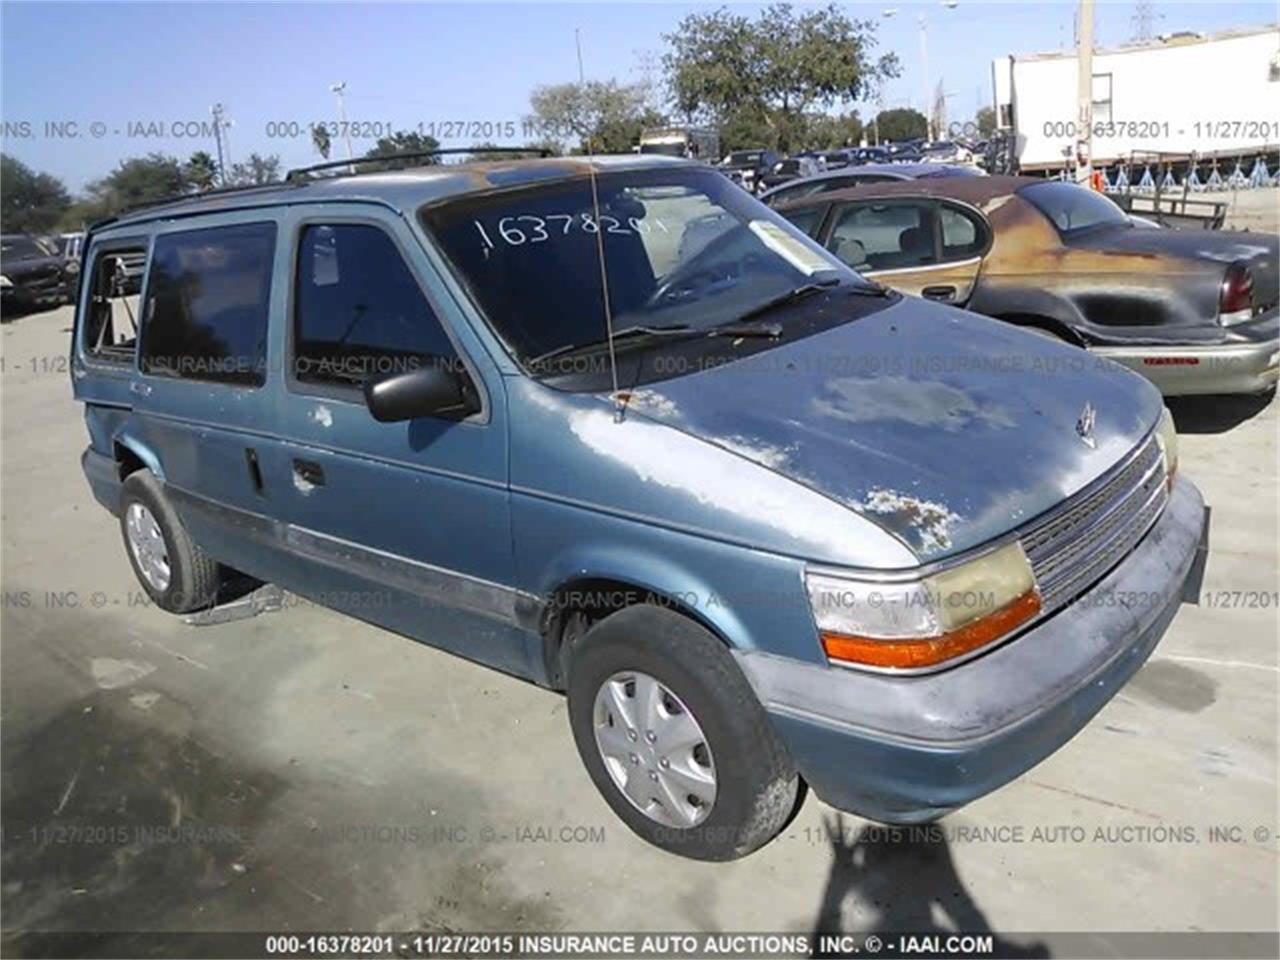 1994 plymouth voyager blue